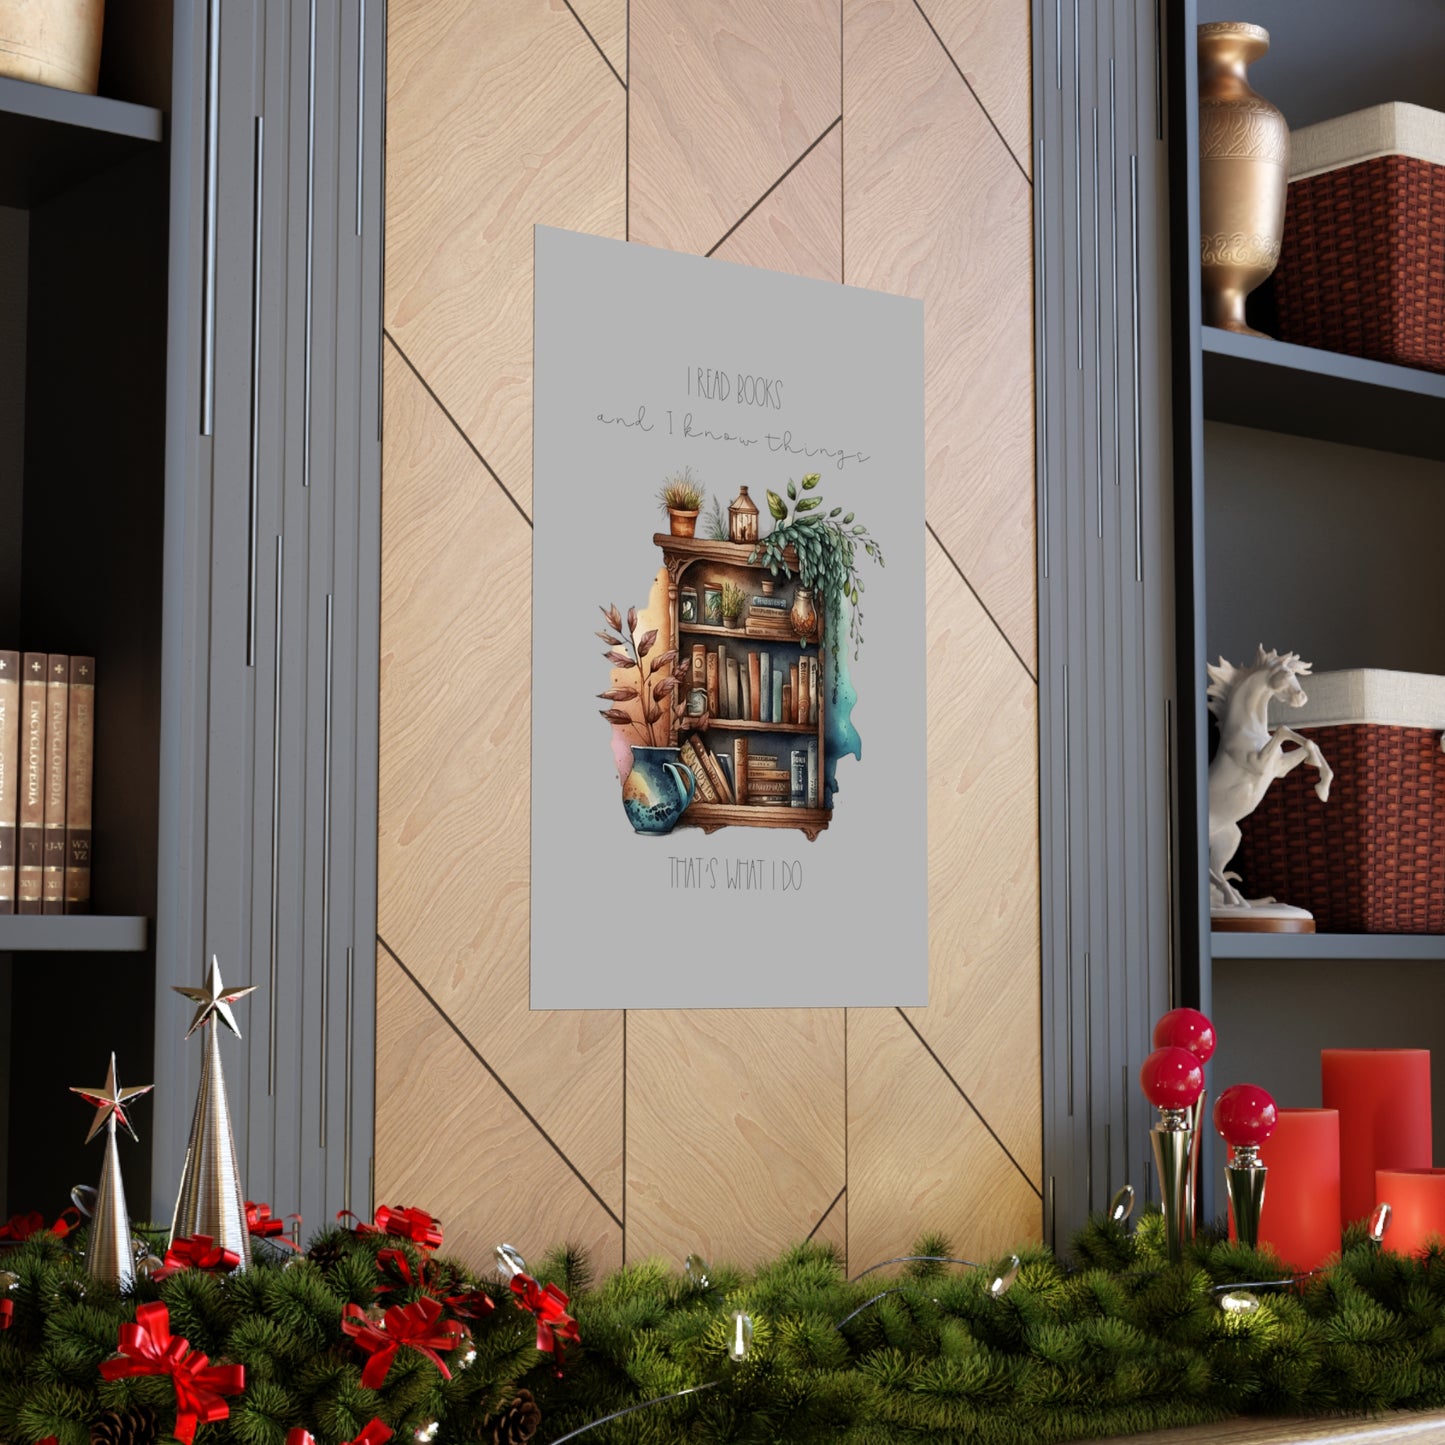 Premium Matte Vertical Posters “I read books and I know things. That’s what I do.”